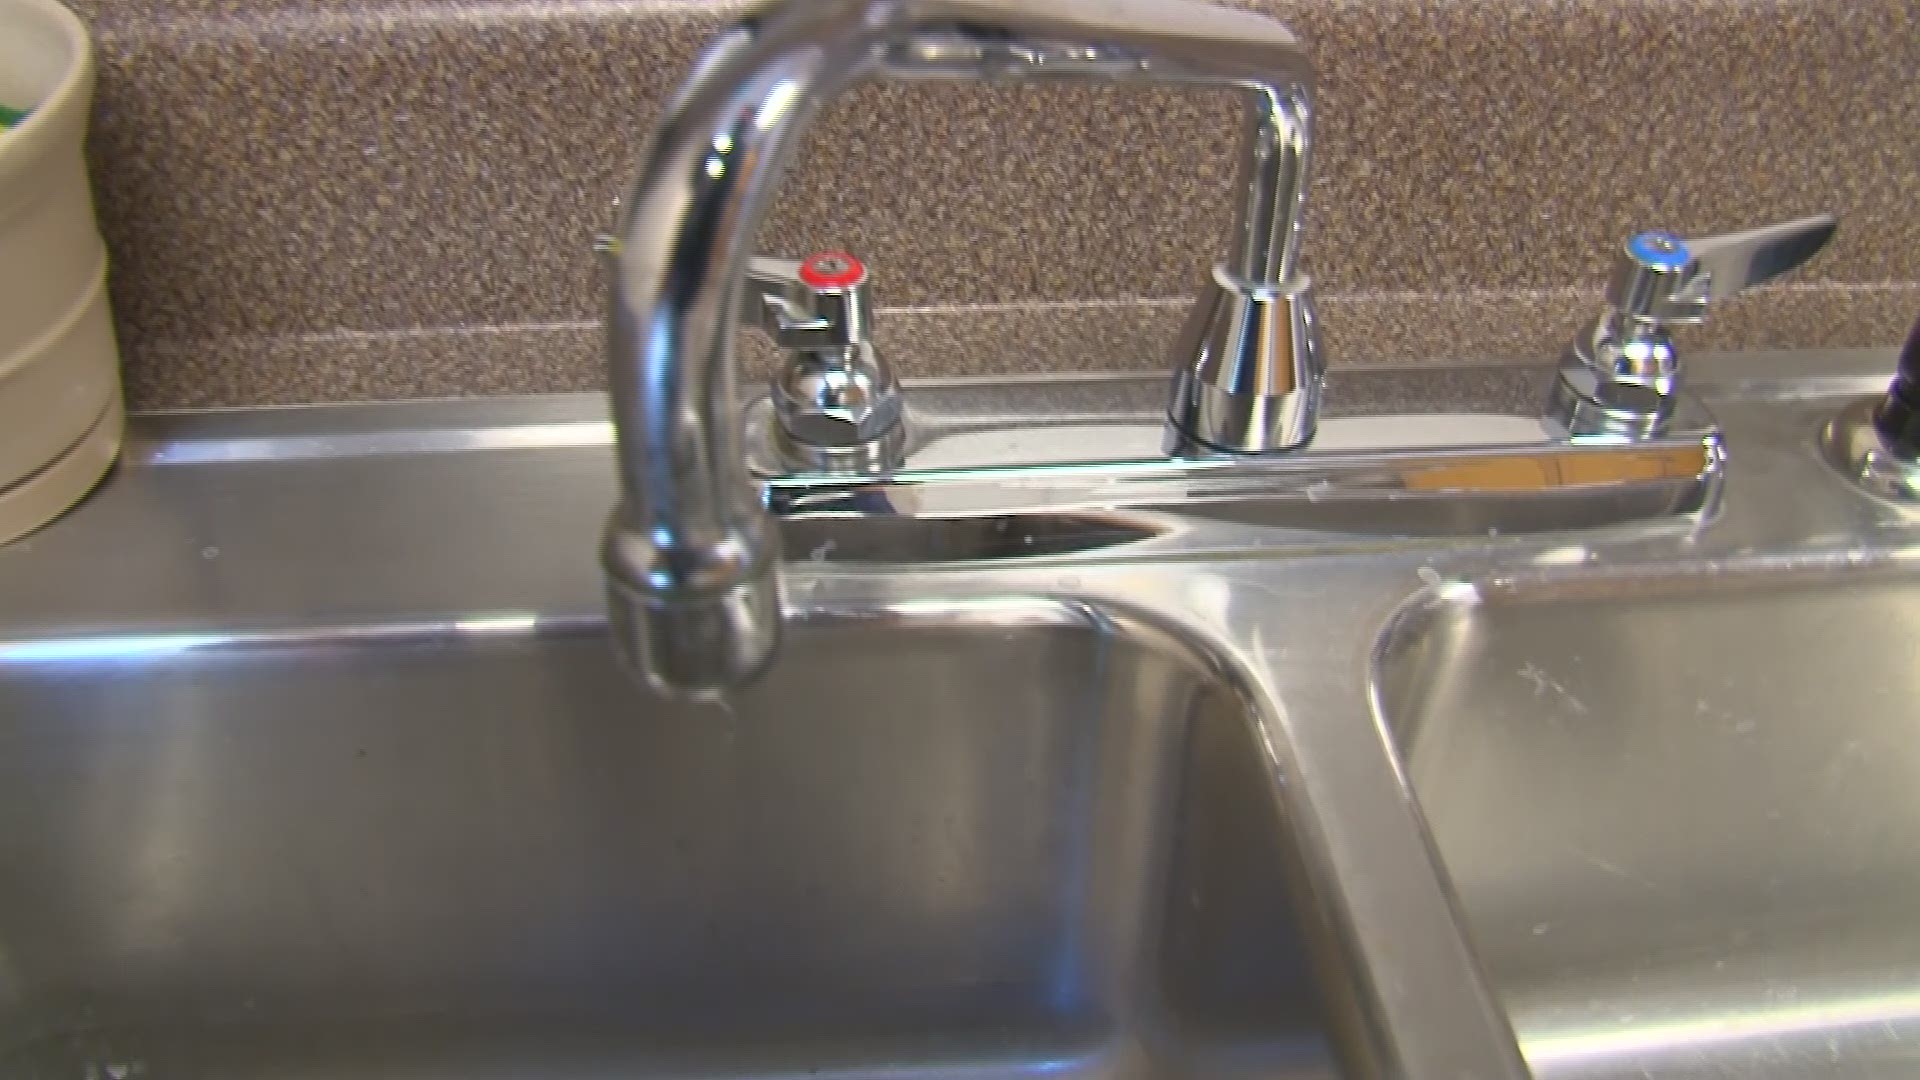 Some Central Texans are still without water due to those winter storms last week.